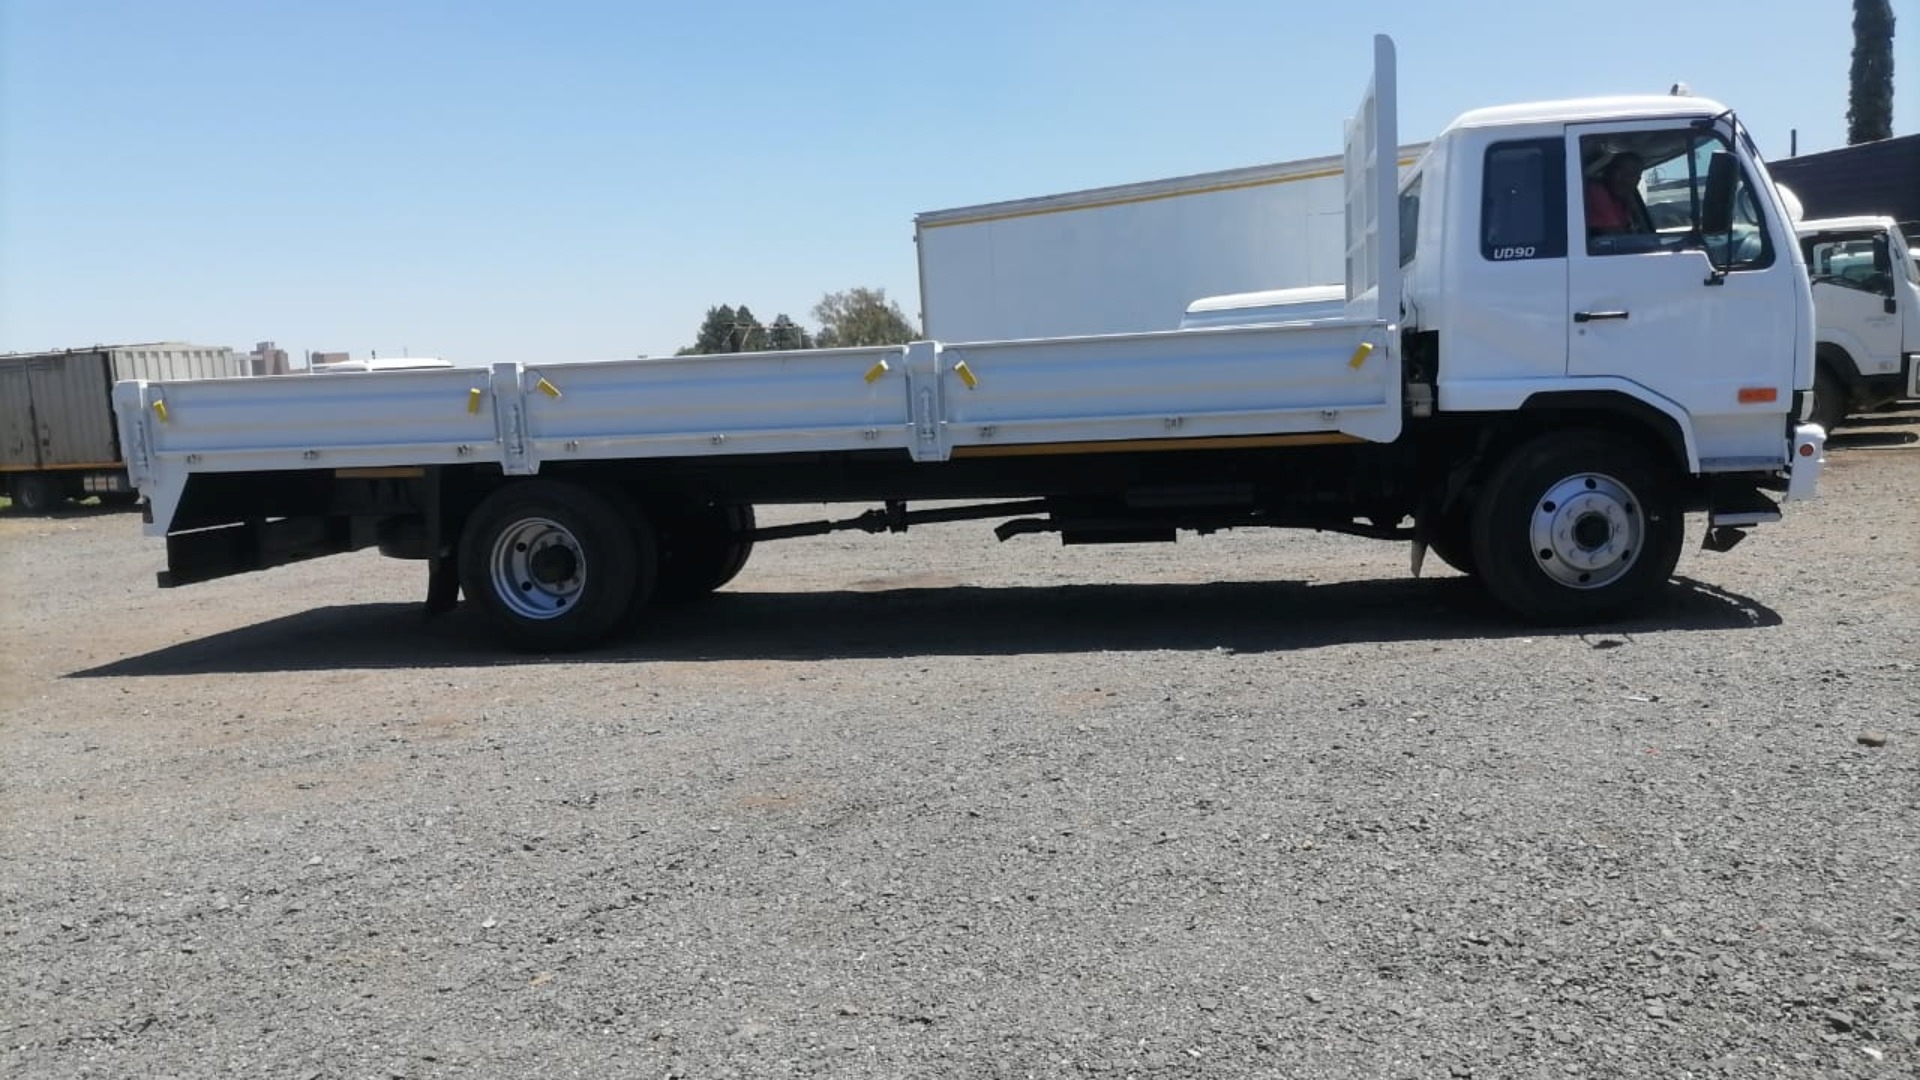 Nissan Dropside trucks NISSAN UD 90 DROPSIDE 2017 for sale by Motordeal Truck and Commercial | Truck & Trailer Marketplace